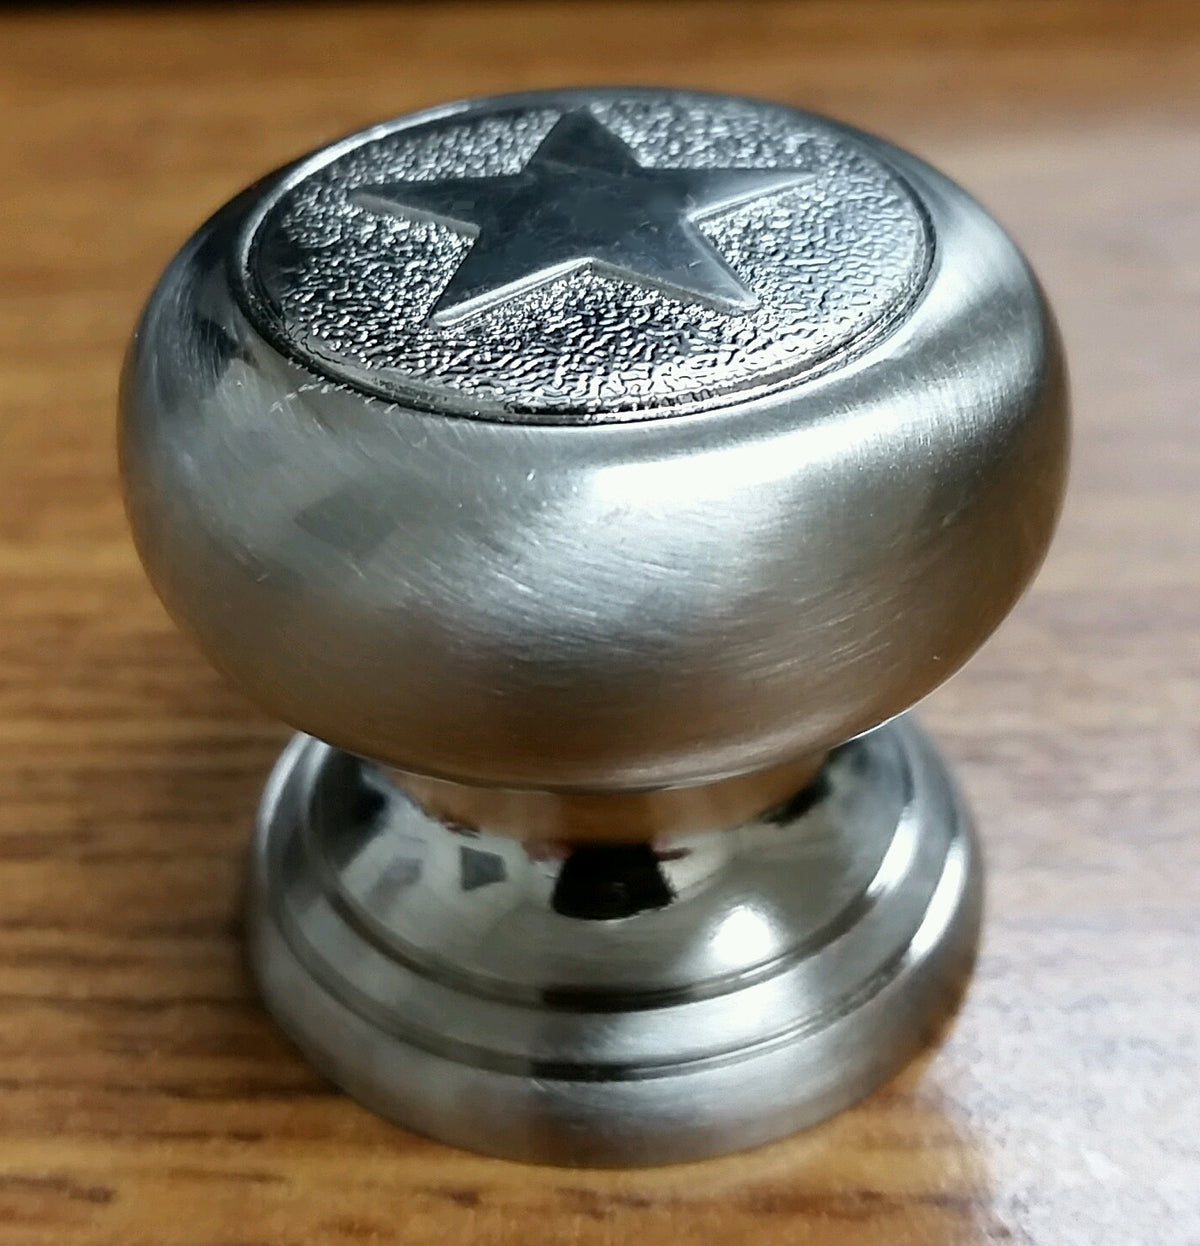 A star-shaped knob viewed from the front, used as a decorative drawer or cabinet pull, displayed on a white background.